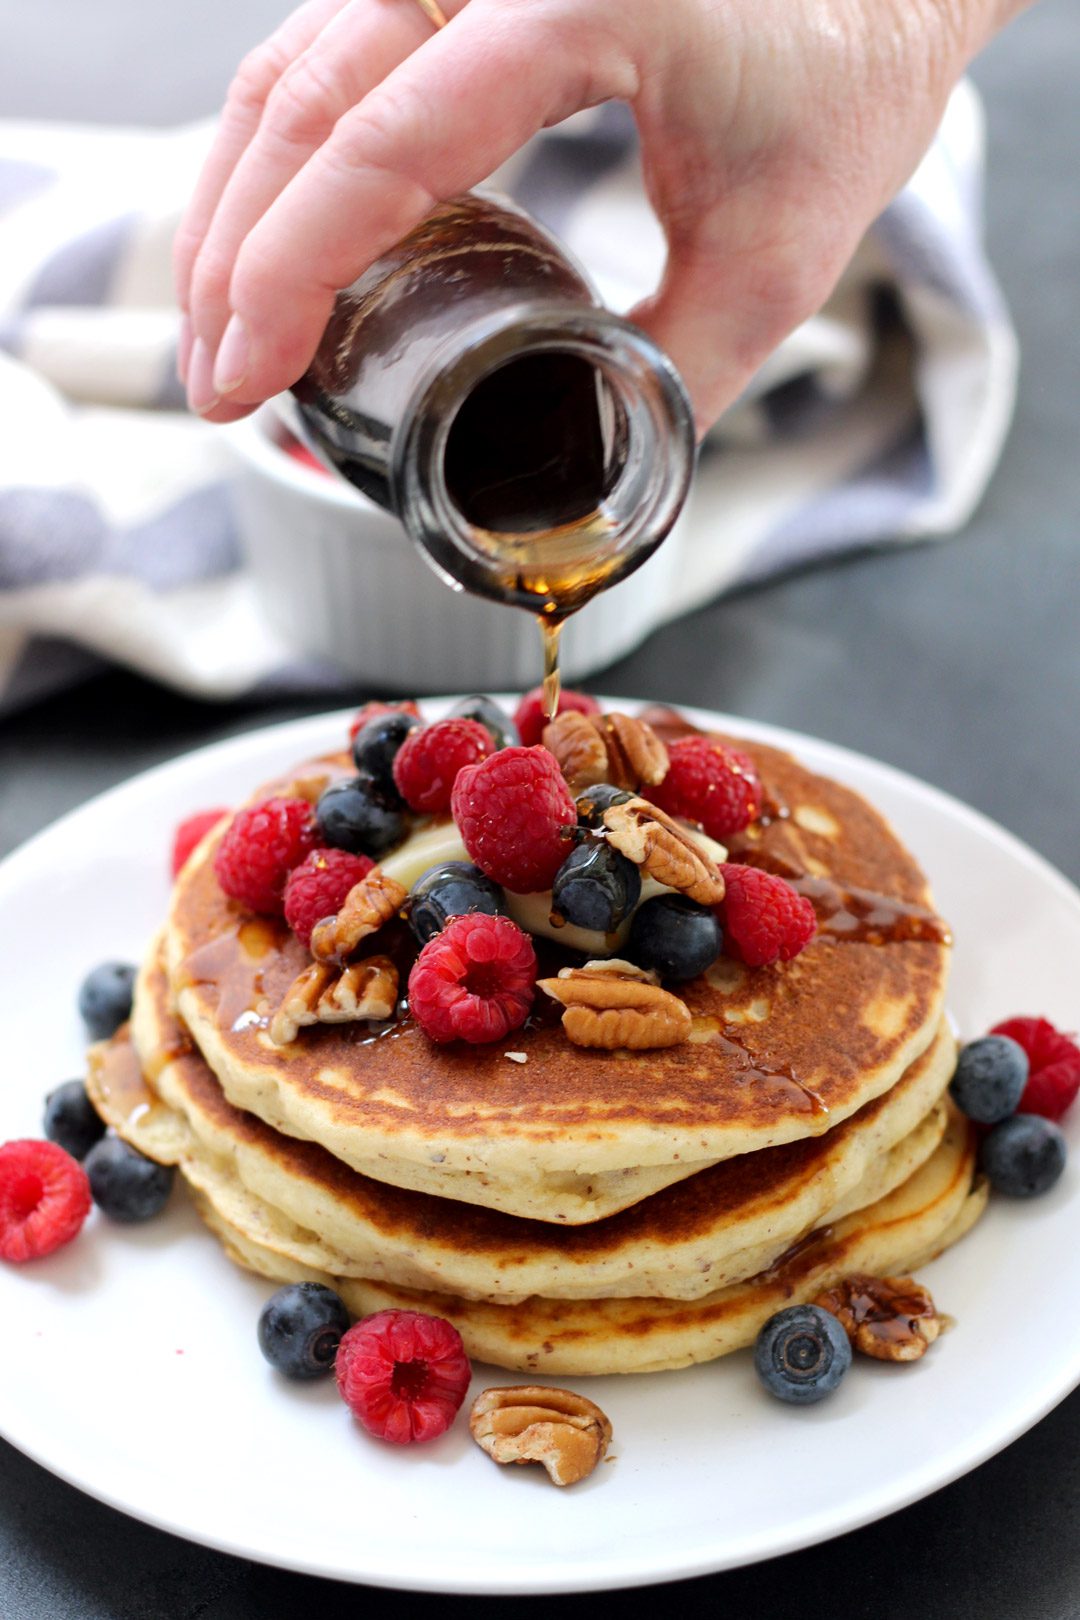 Pouring homemade syrup over a stack of pancakes with nuts, raspberries, and blueberries on top.